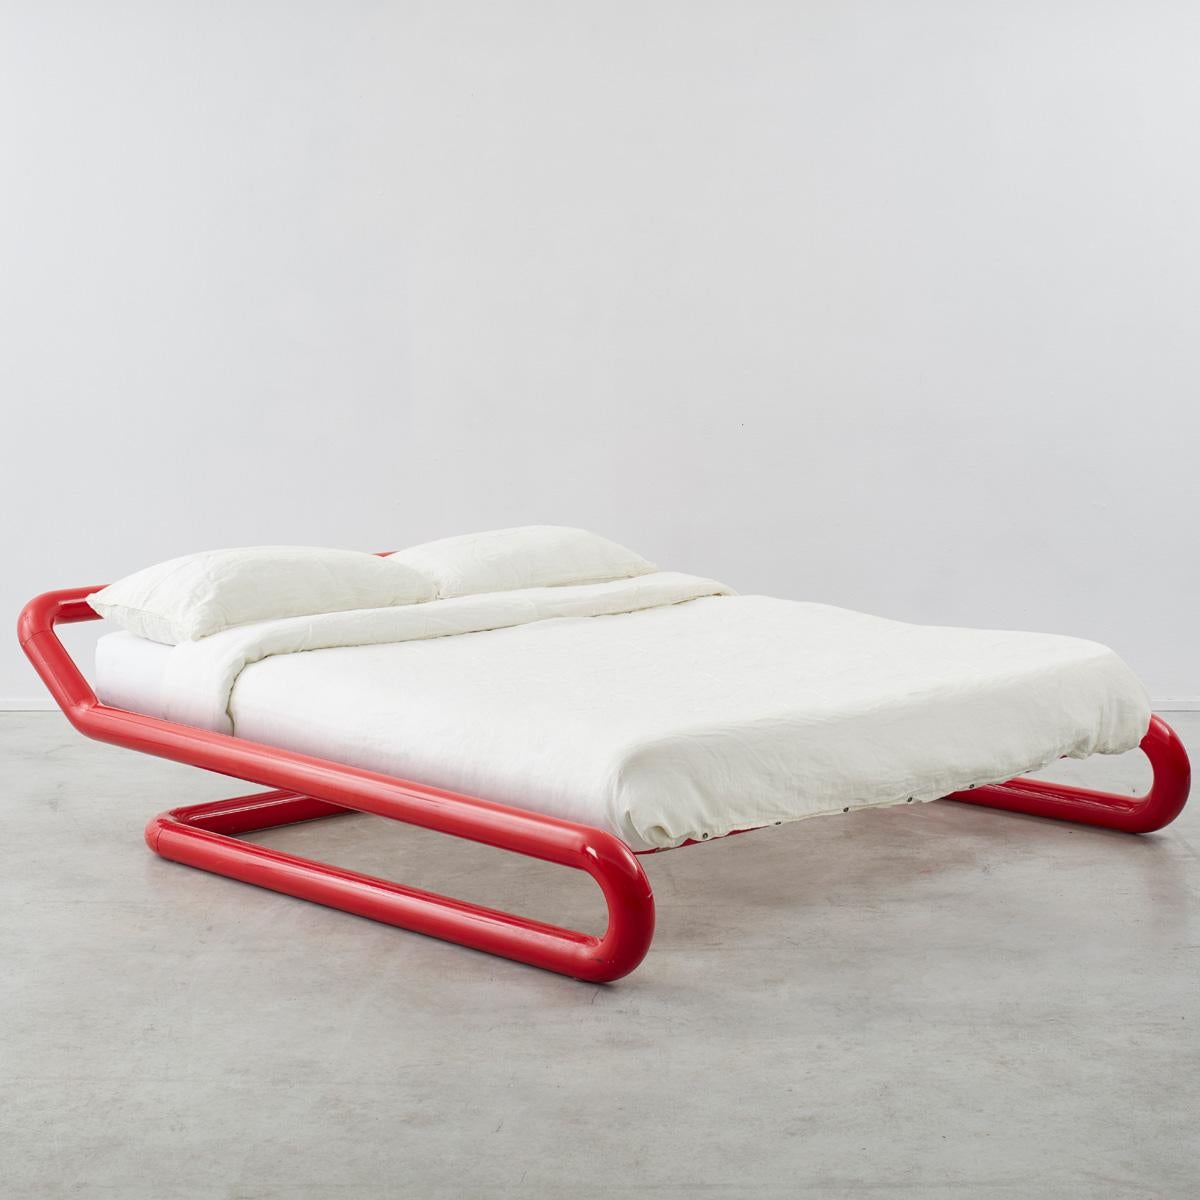 Enameled Marzio Cecchi cantilevered bed frame for Studio Most, Italy, 1960s